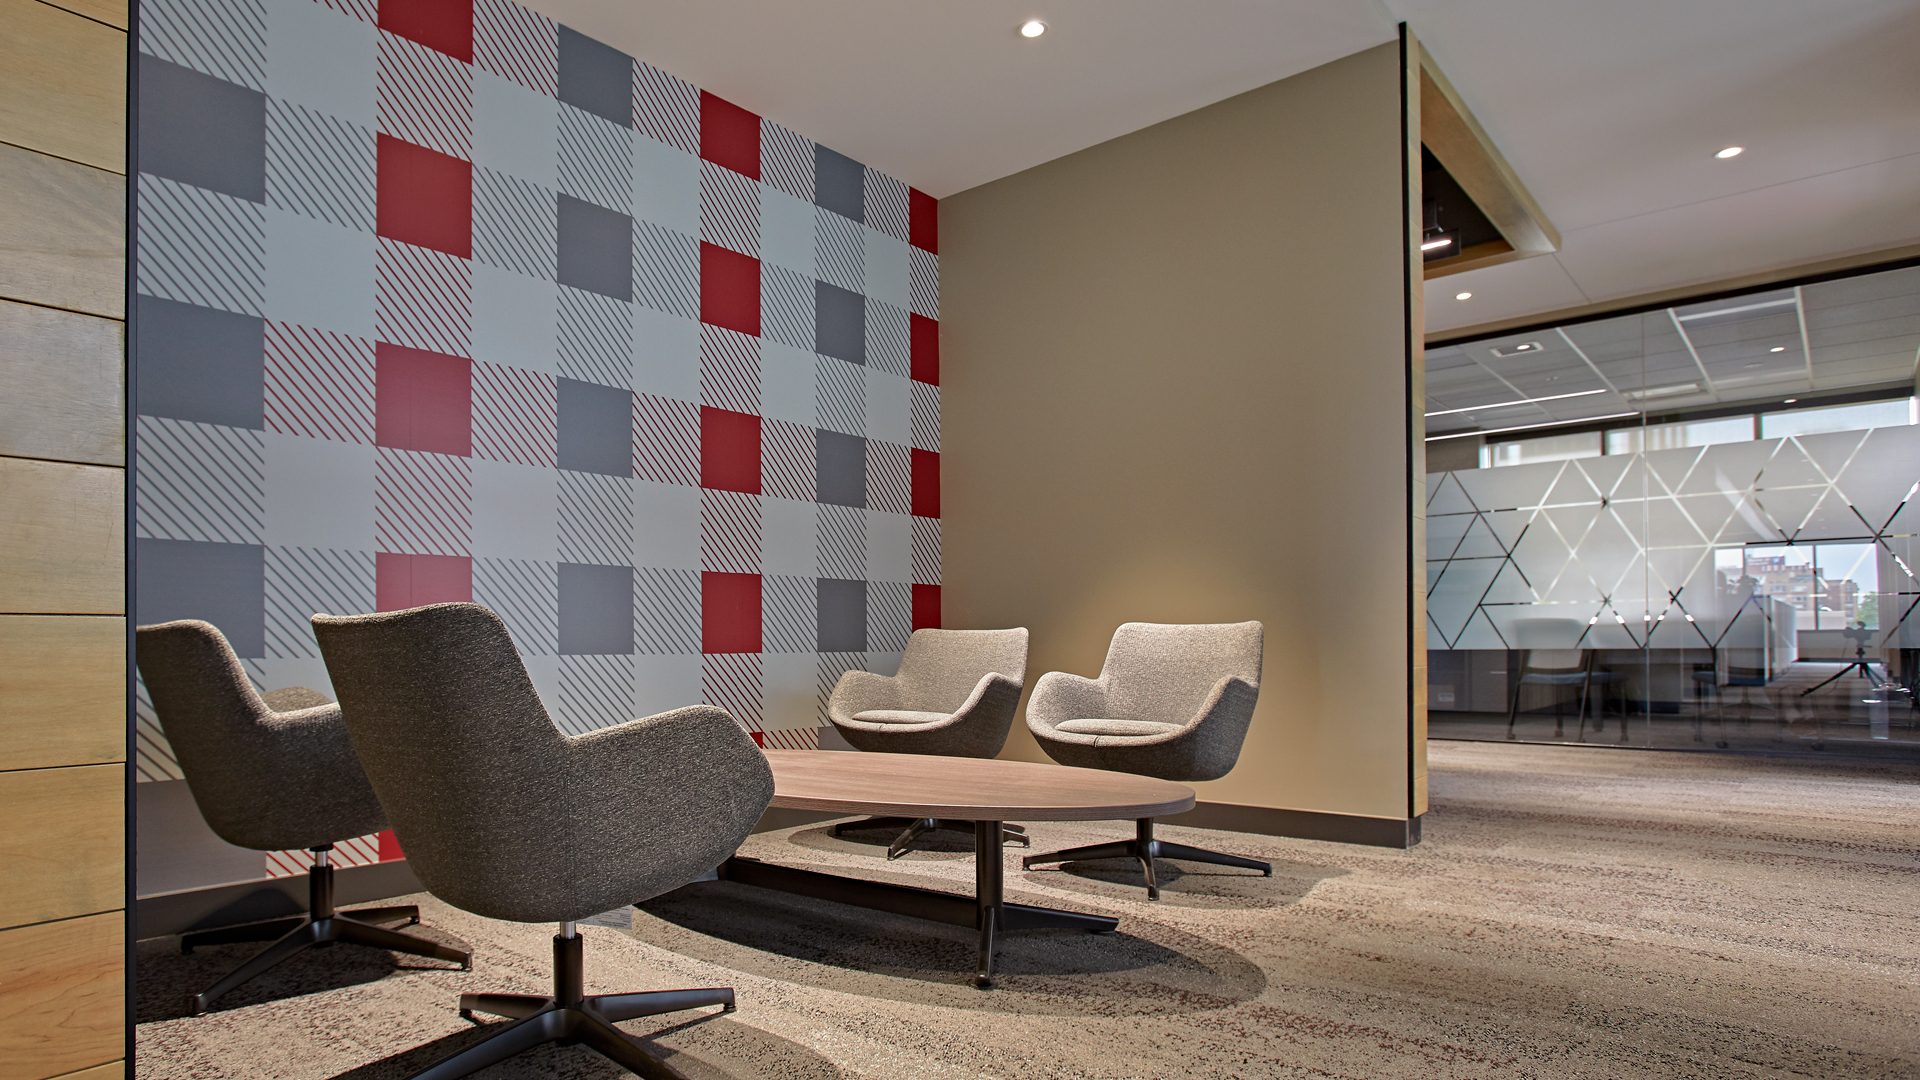 Pizza Hut HQ Soft Seating Meeting Area with Gingham Environmental Graphic